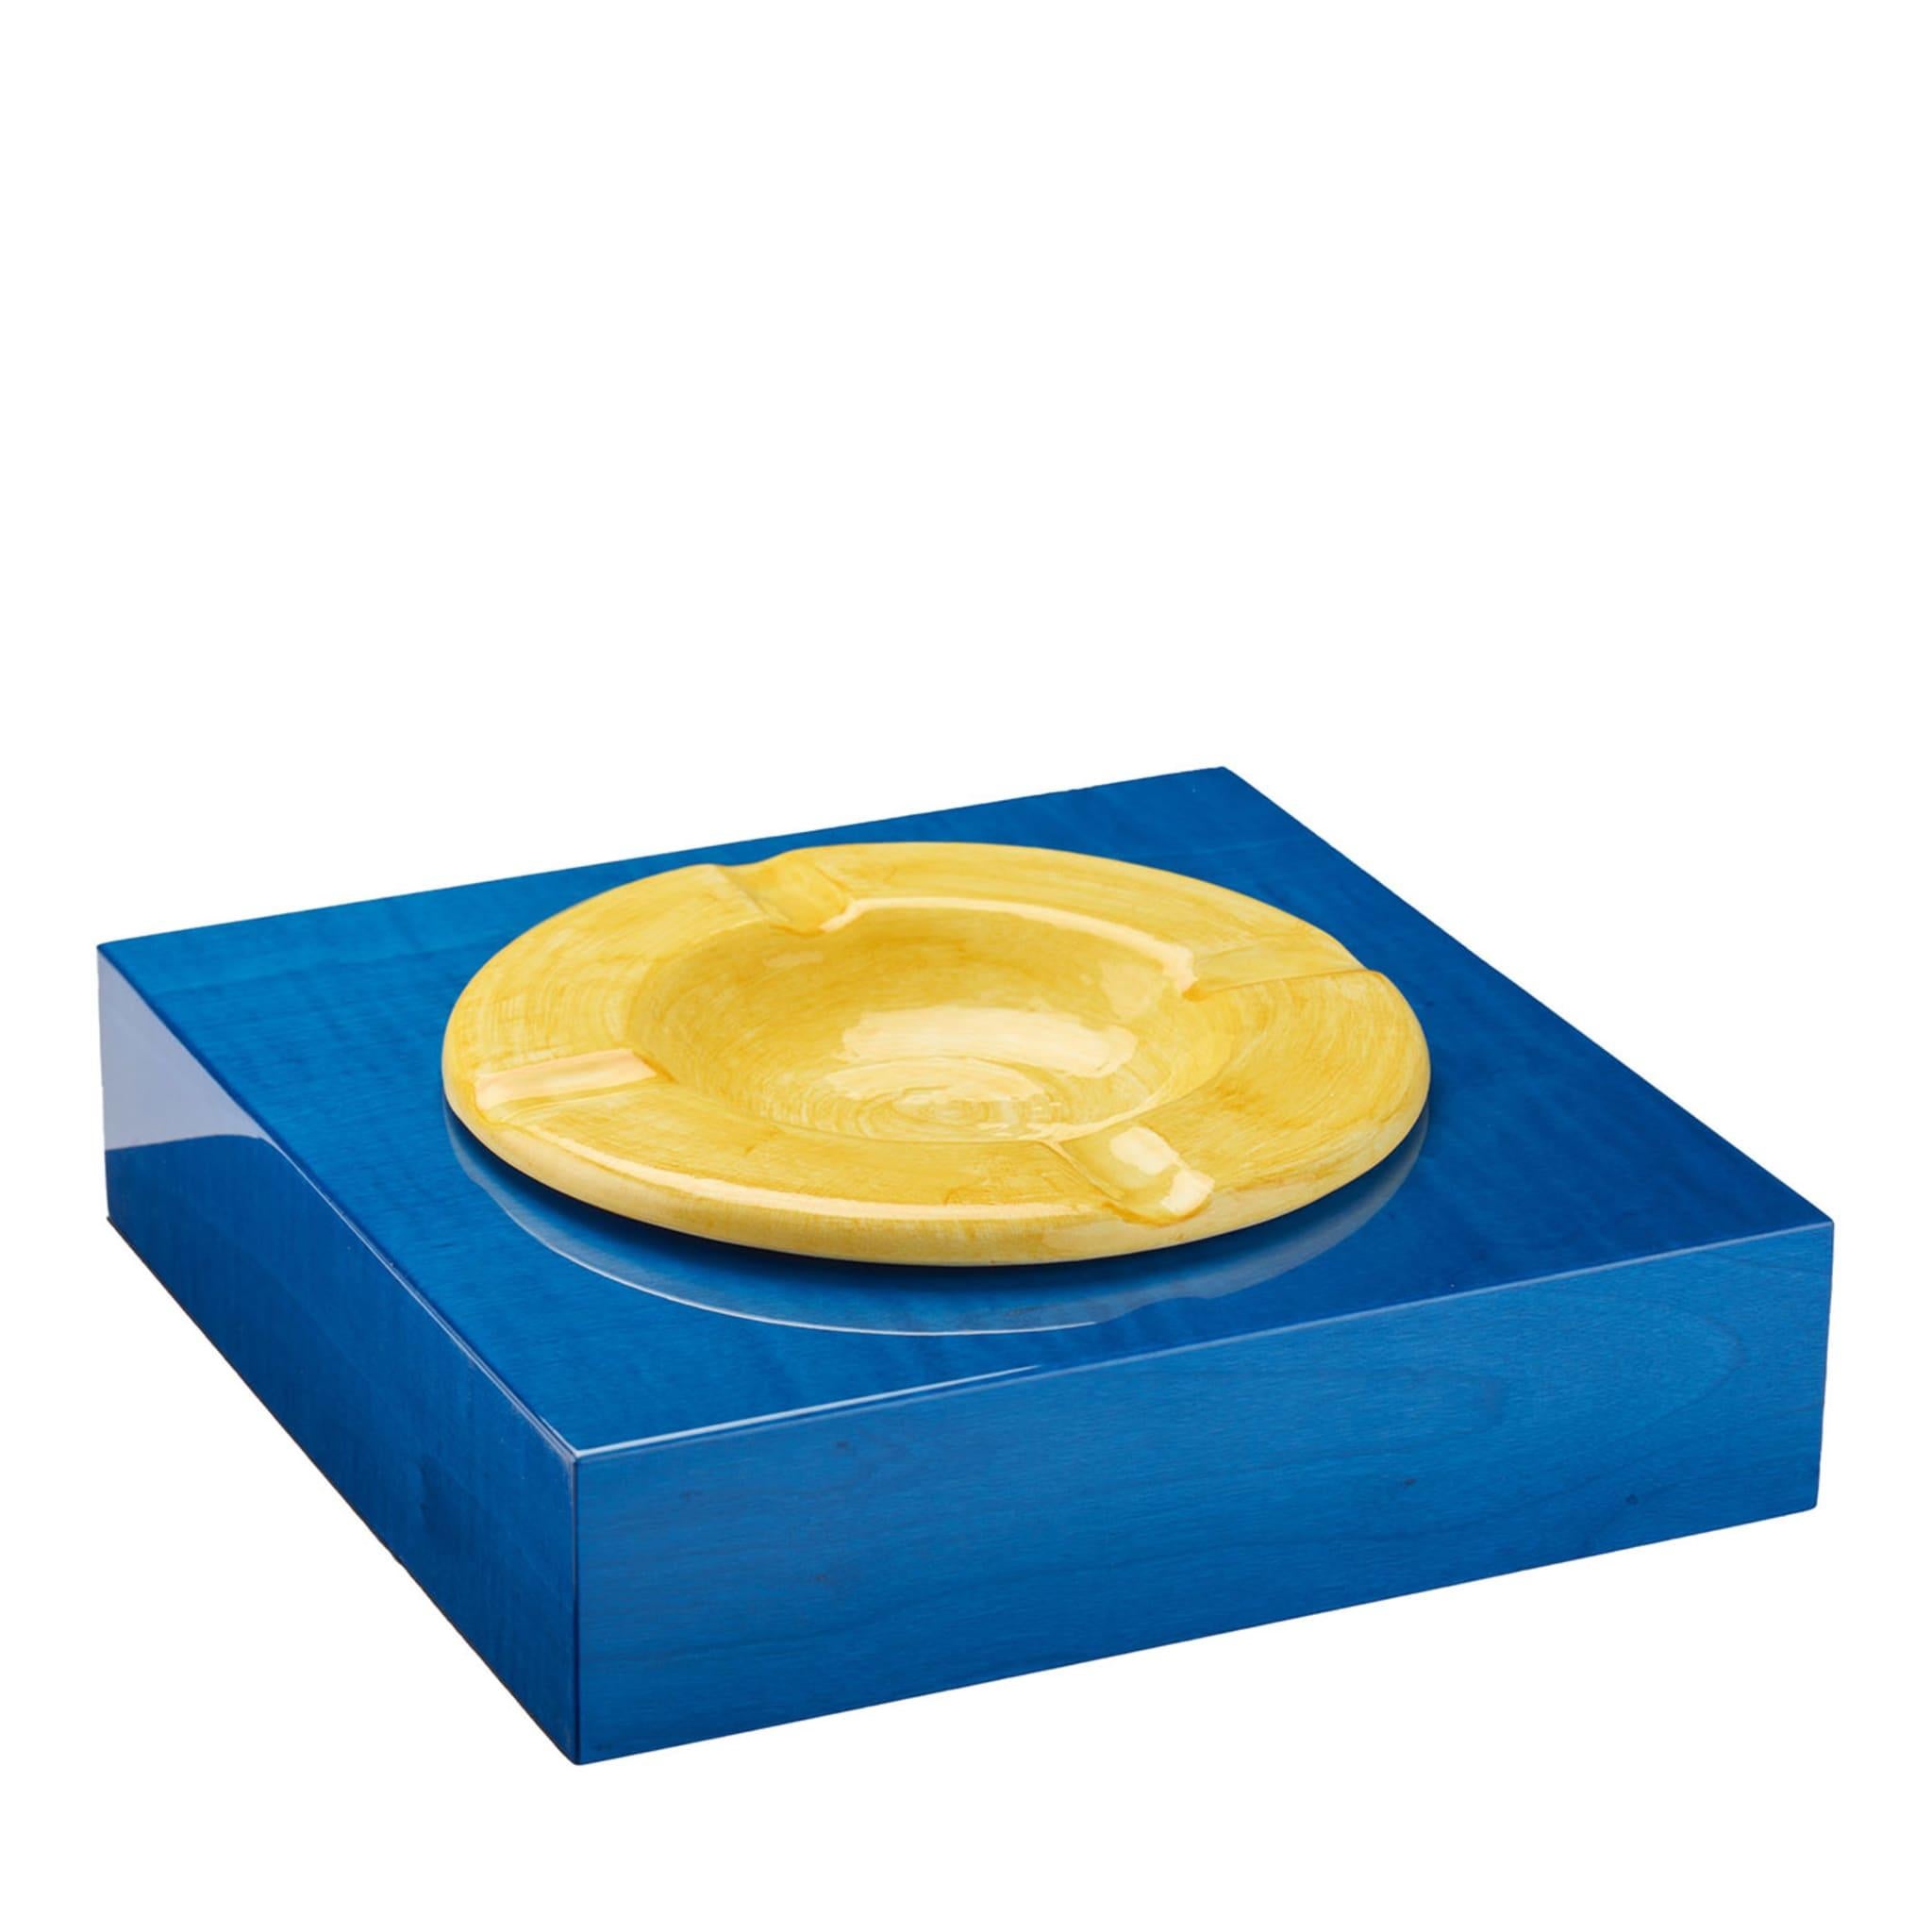 Showcasing splendid veinings through the polished blue and yellow paint decorating its square and clean shape, this ashtray turns an everyday object into a refined piece of interior design. Handmade of wood and ceramic, it is also finished and